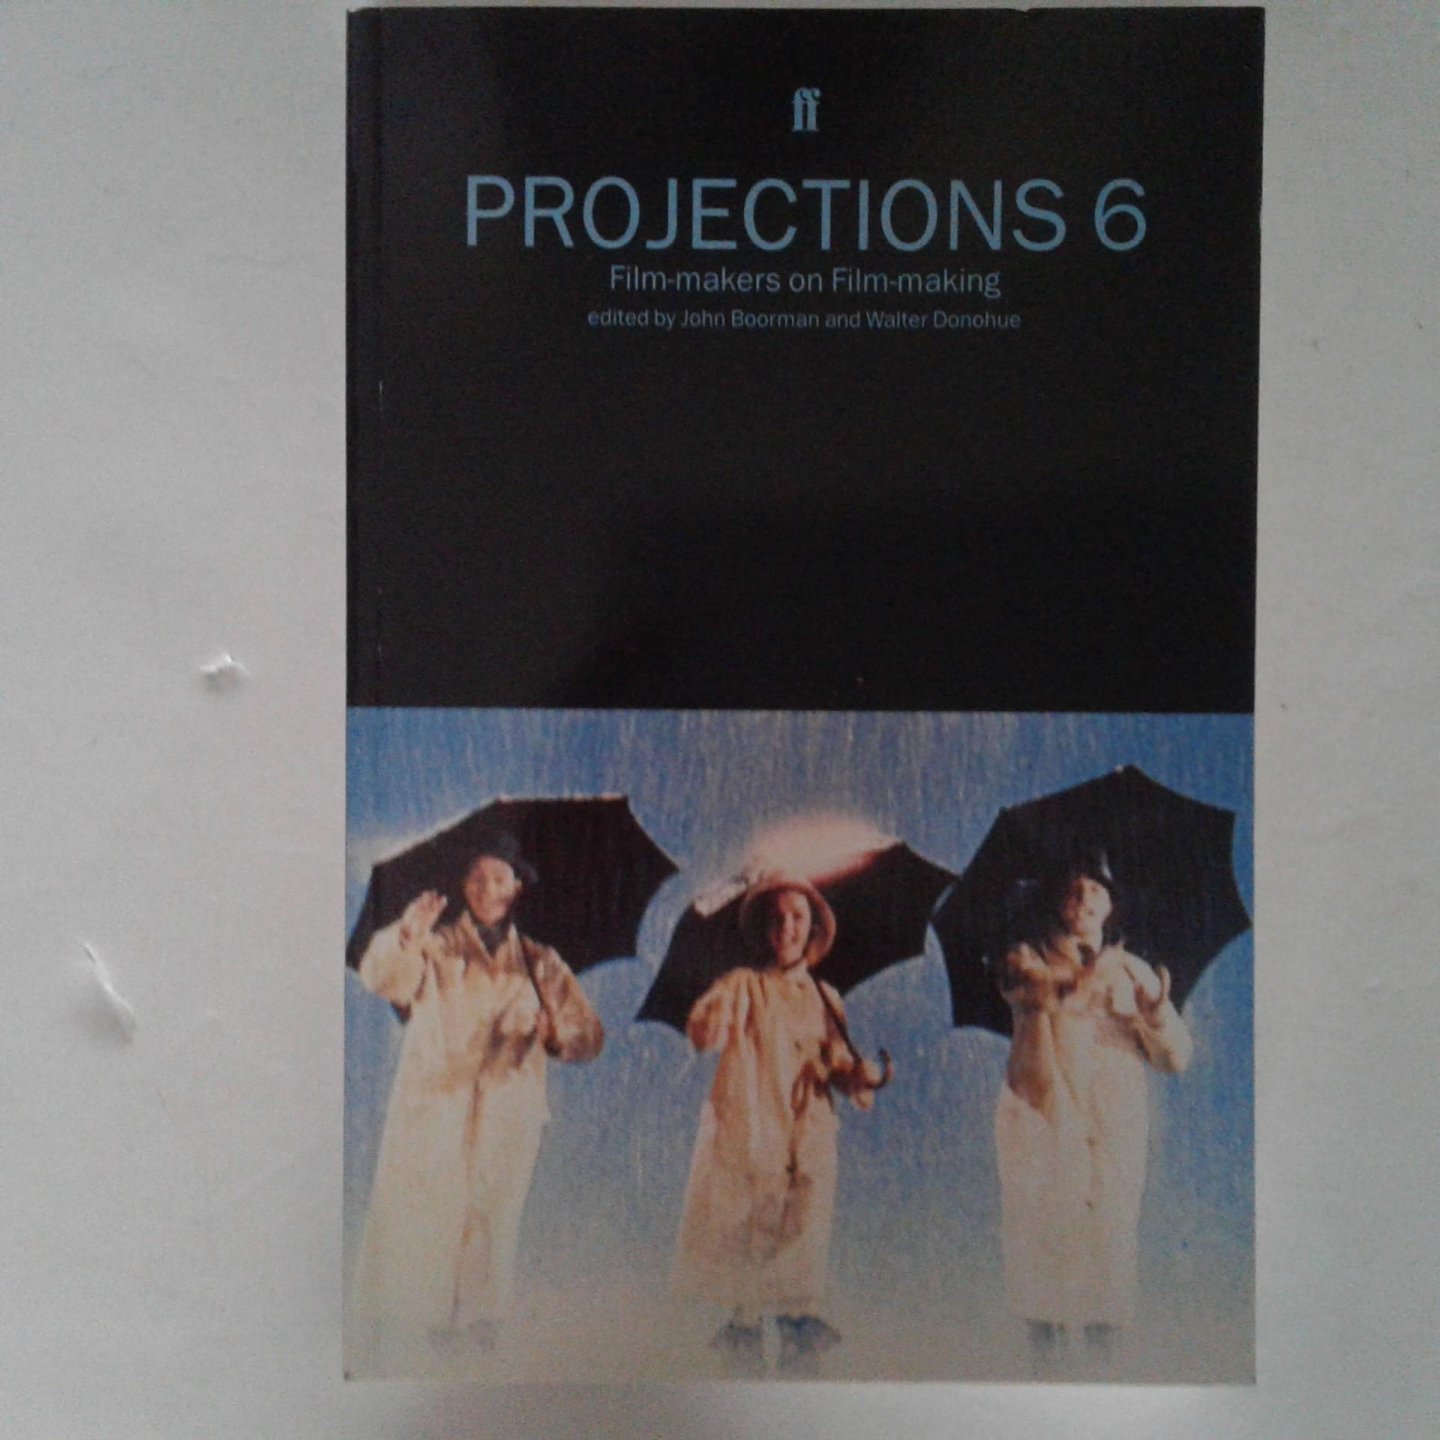 Boorman, John ; Walter Donohue - Projections 6 ; Film-makers on Film-making